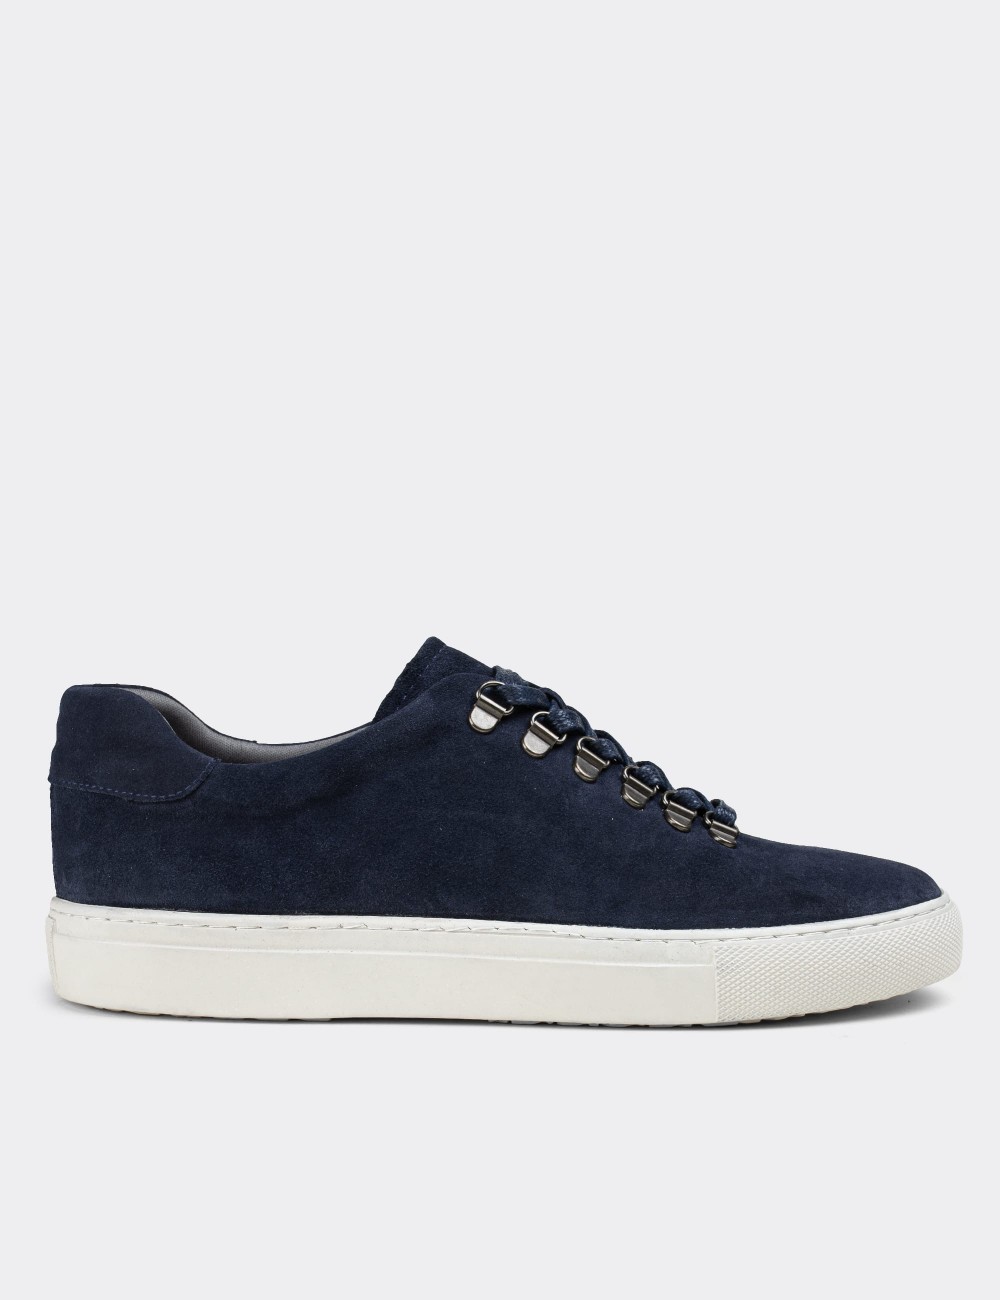 Navy Suede Leather  Sneakers - 01835MLCVC01